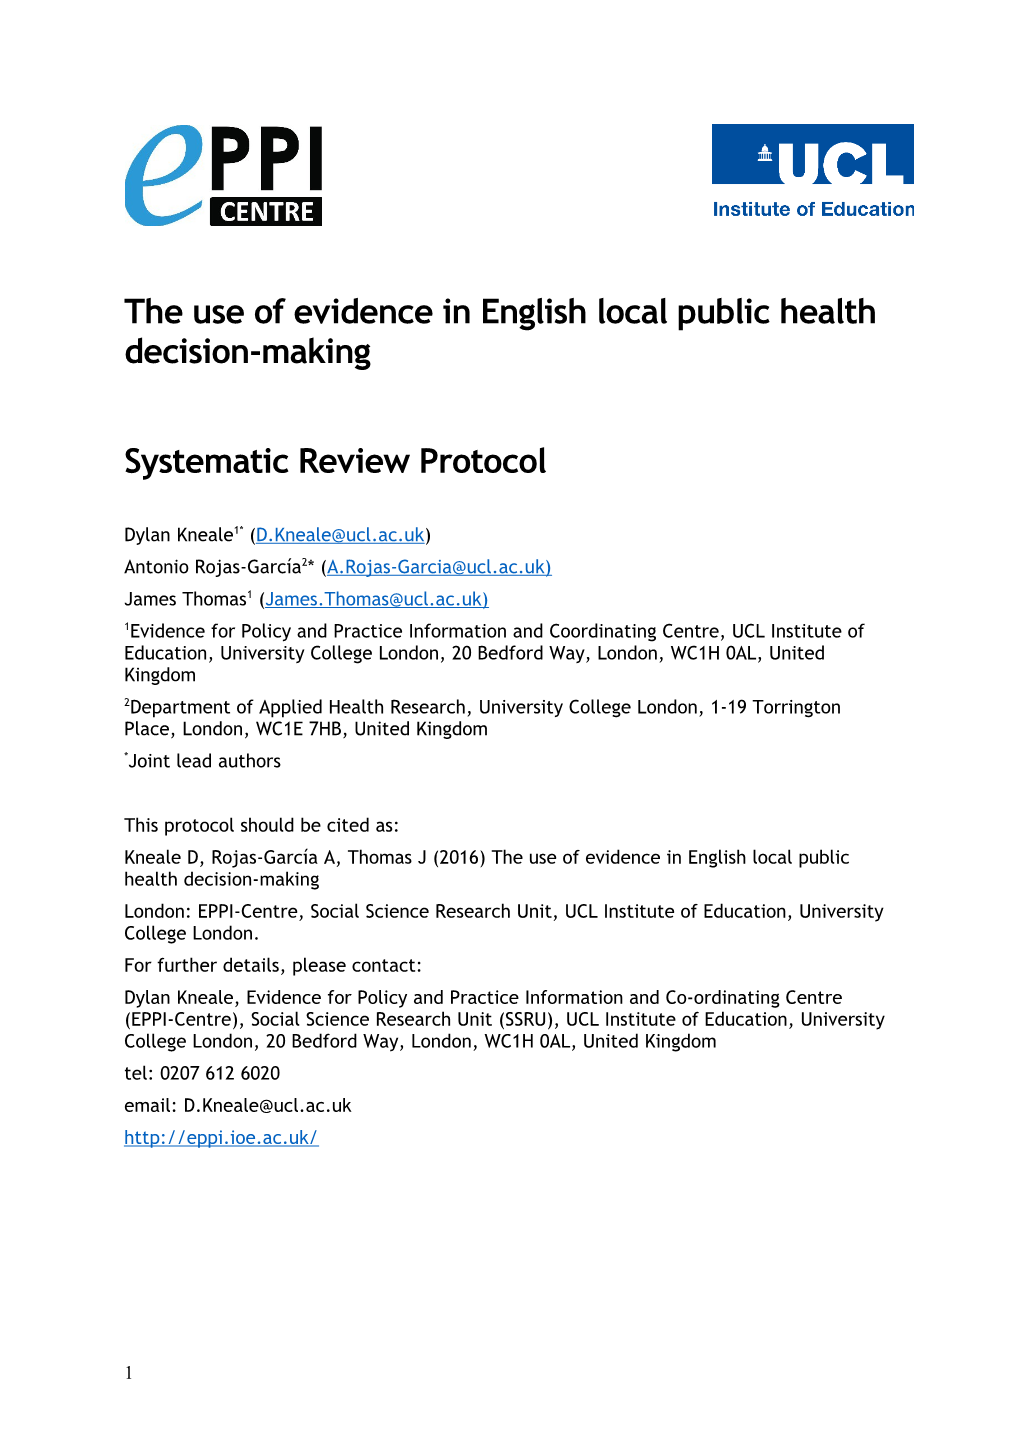 The Use of Evidence in English Local Public Health Decision-Making